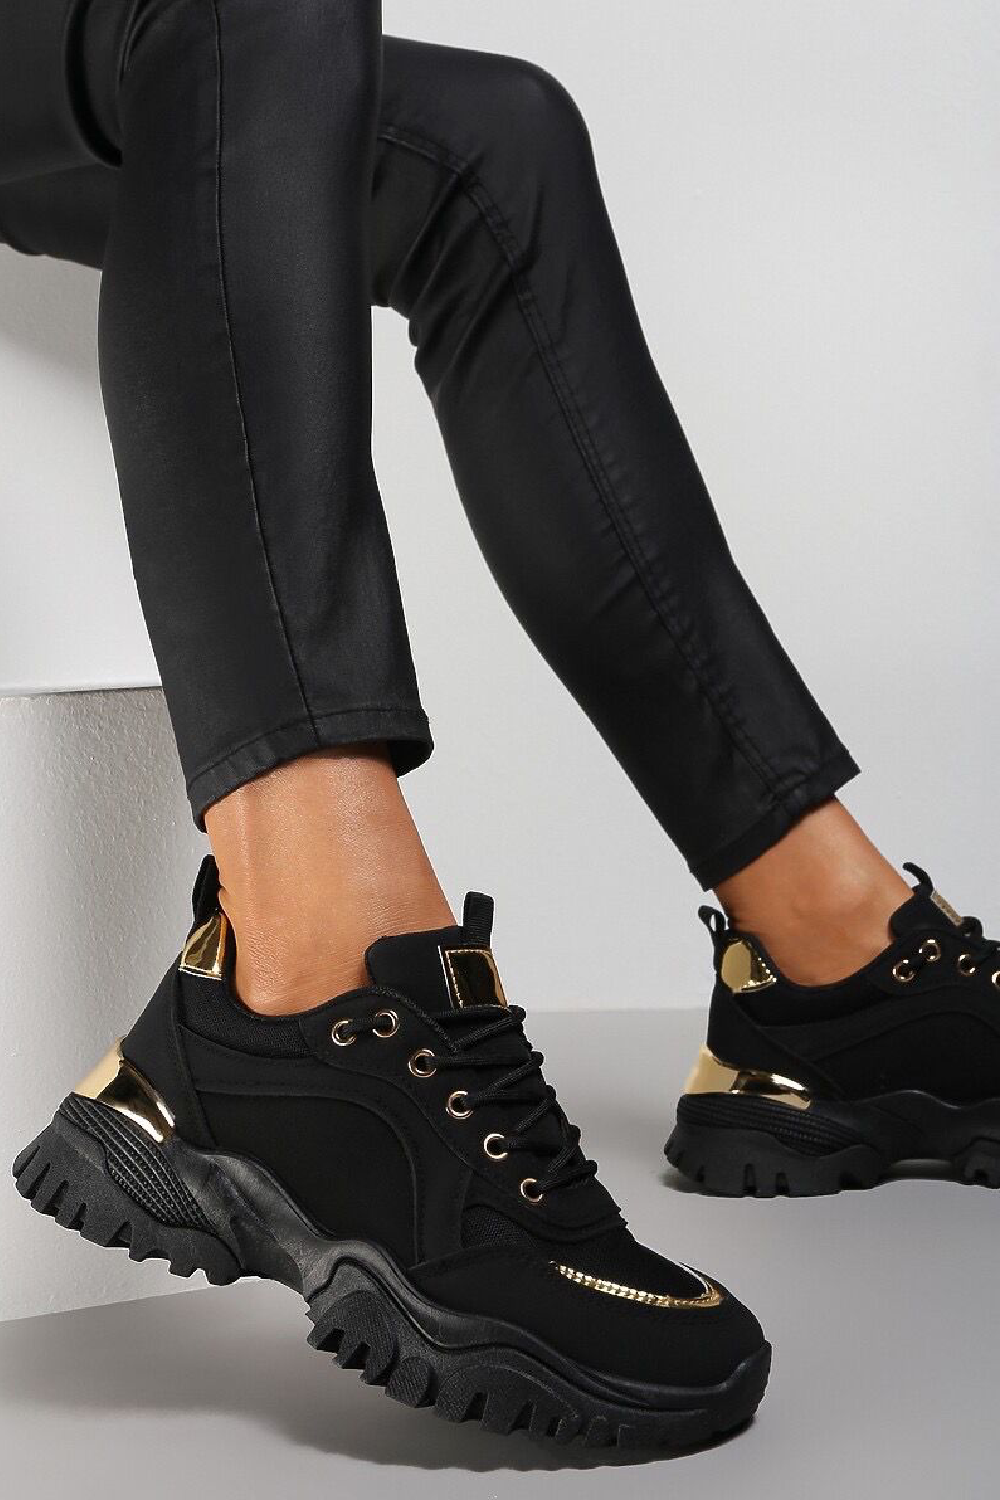 BLACK LACE UP GOLD CLIP HEEL TRAINERS SHOES